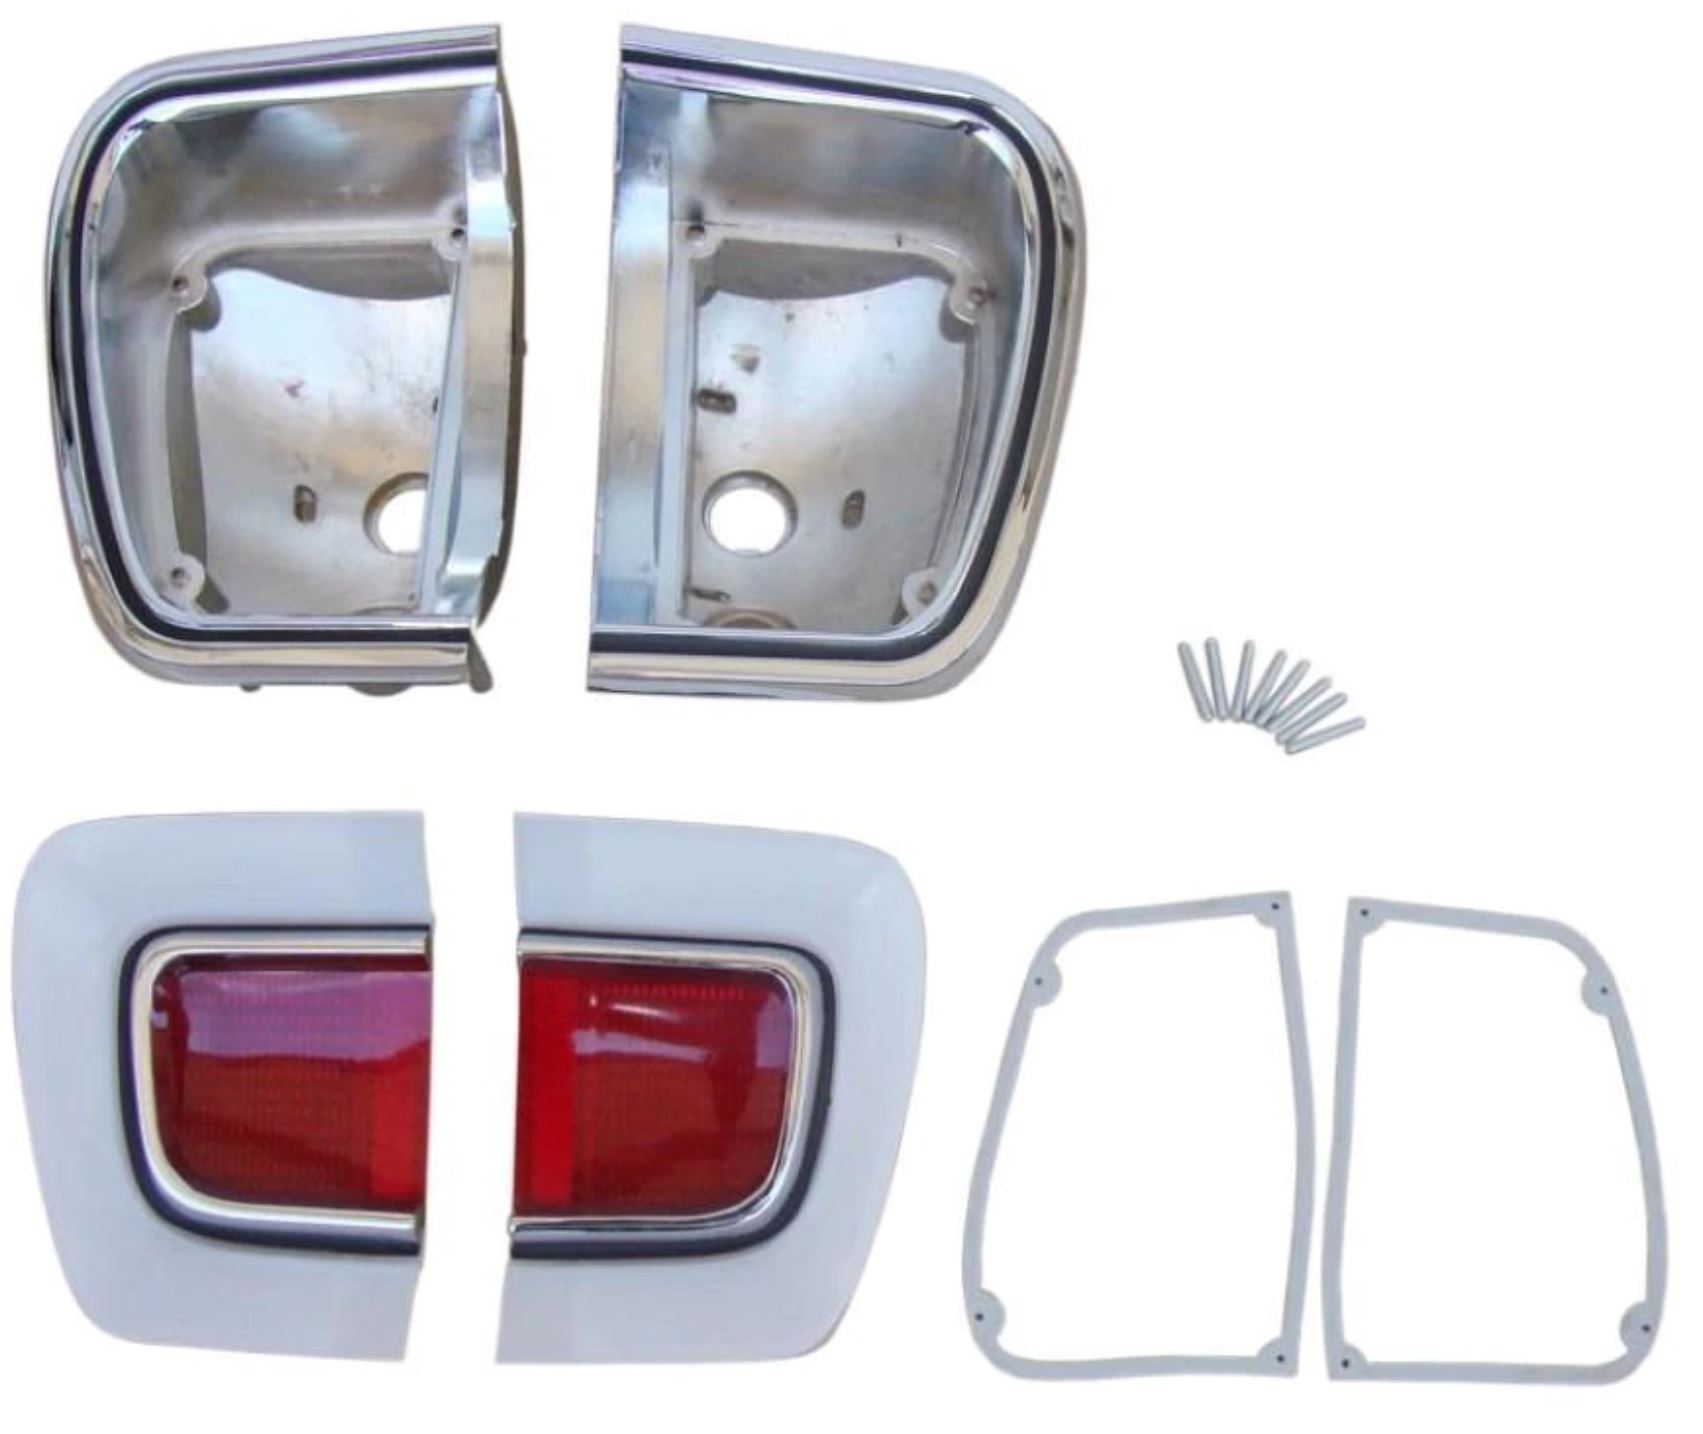  1968 Plymouth Barracuda Taillight Kit